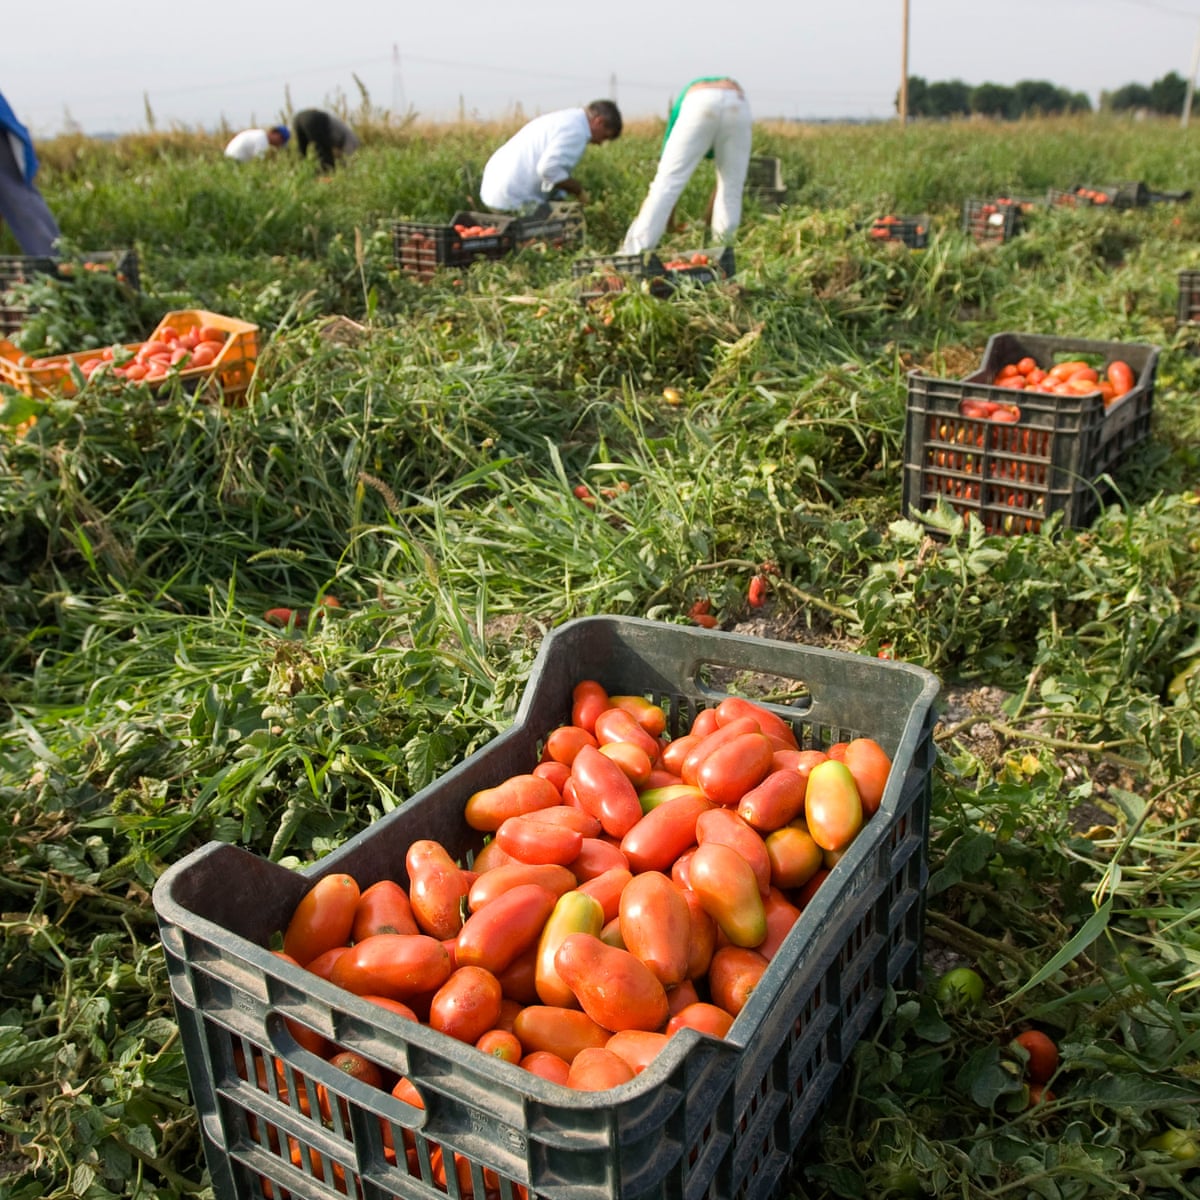 Are your tinned tomatoes picked by slave labour? | Italy | The Guardian